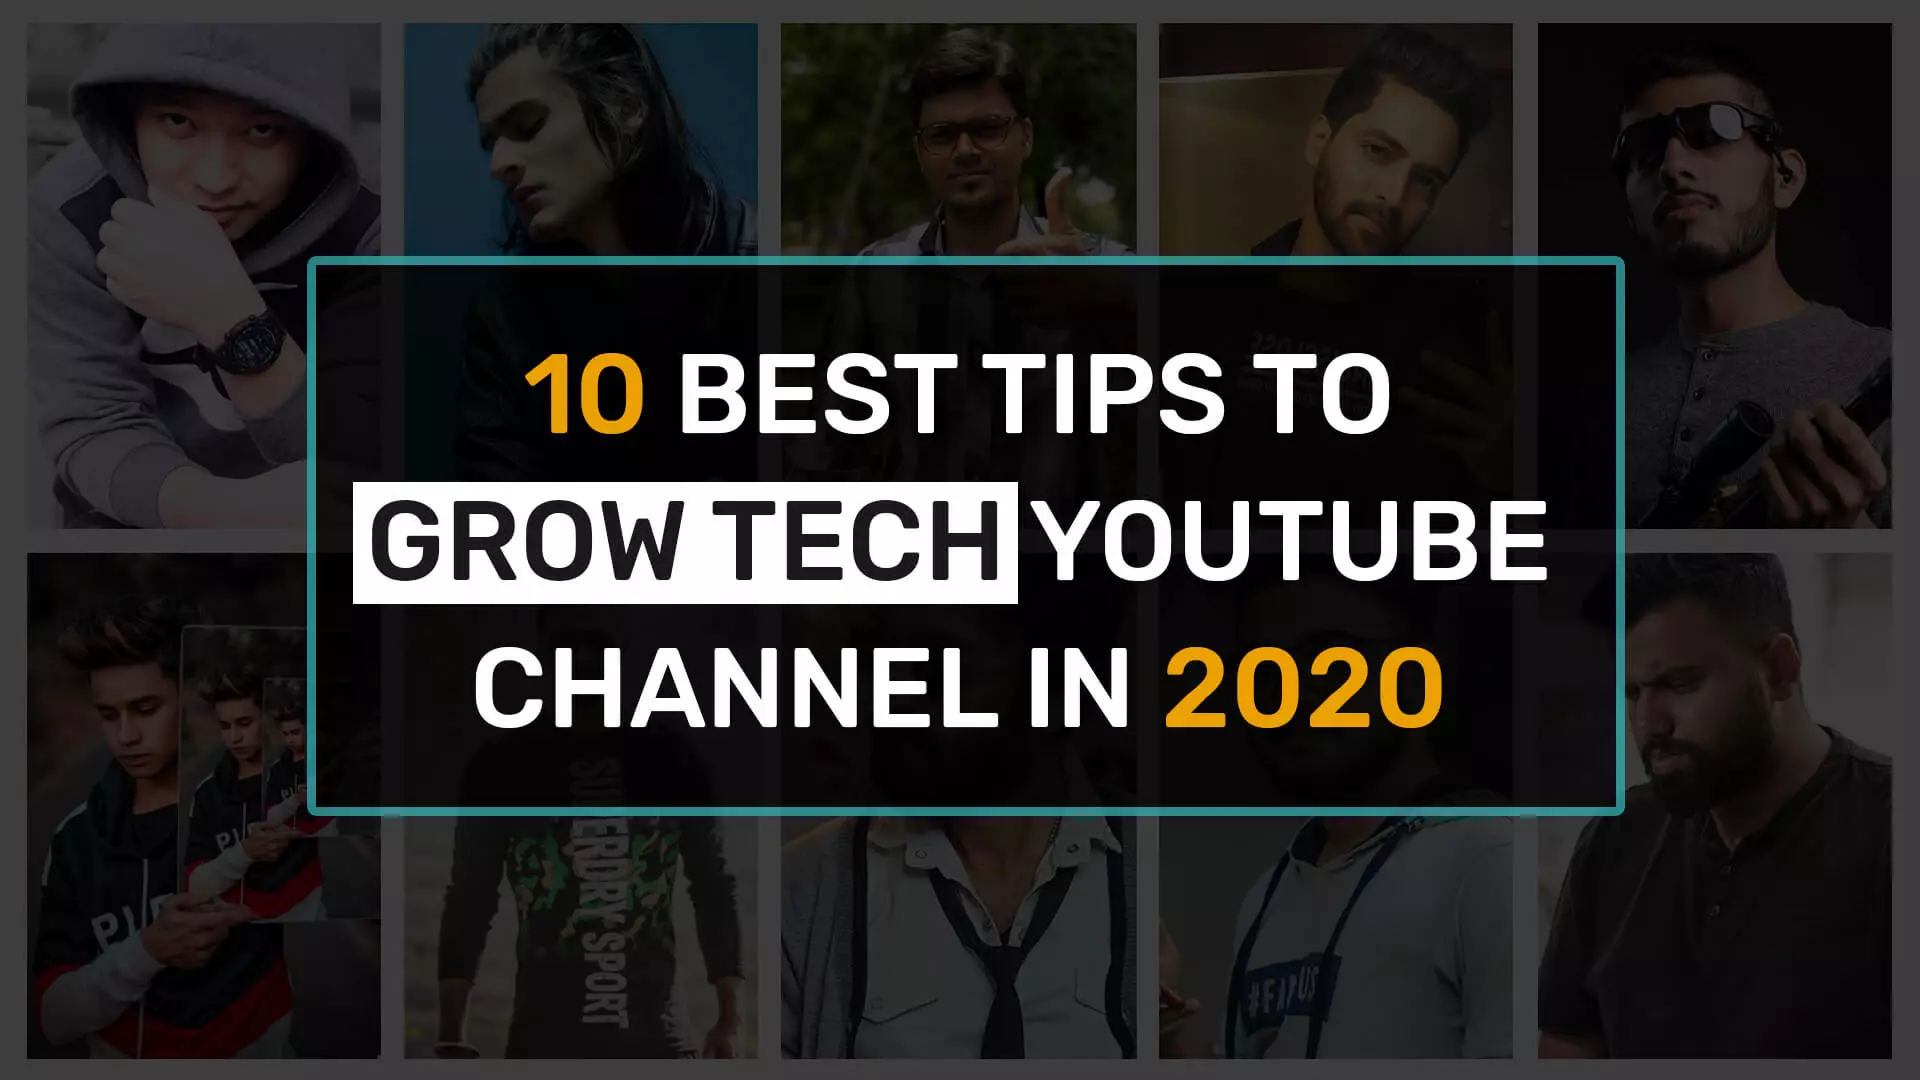 How to grow tech YouTube Channel